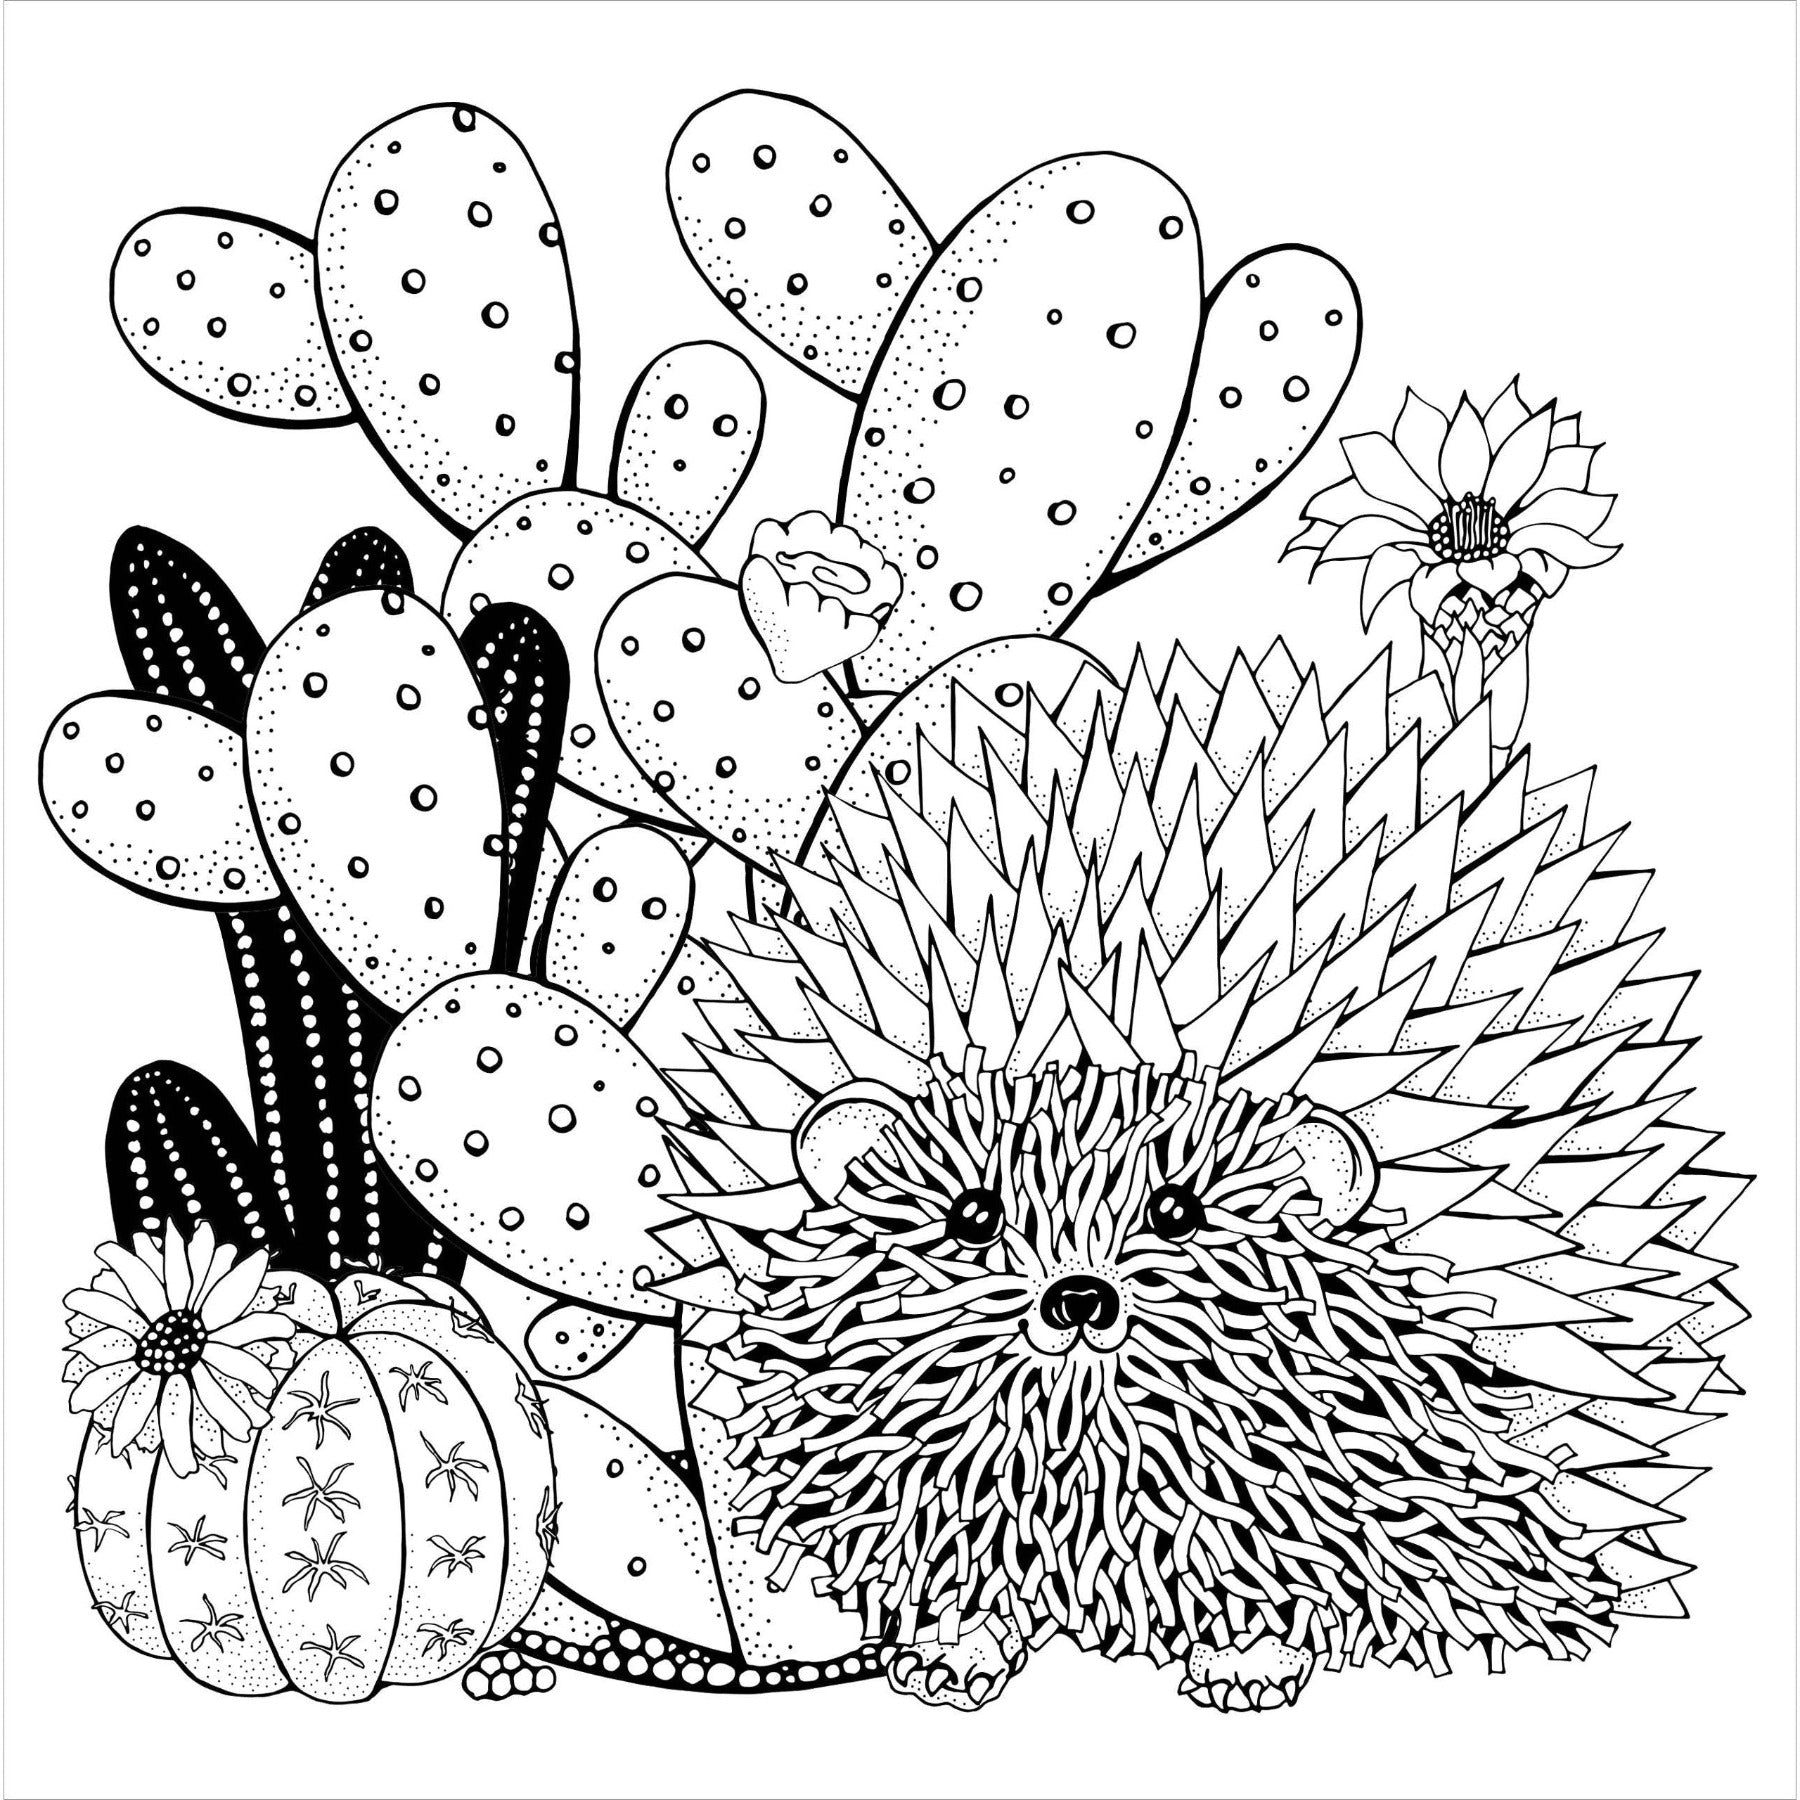 Succulents Adult Coloring Book | 31 Relaxing Plants Illustrations